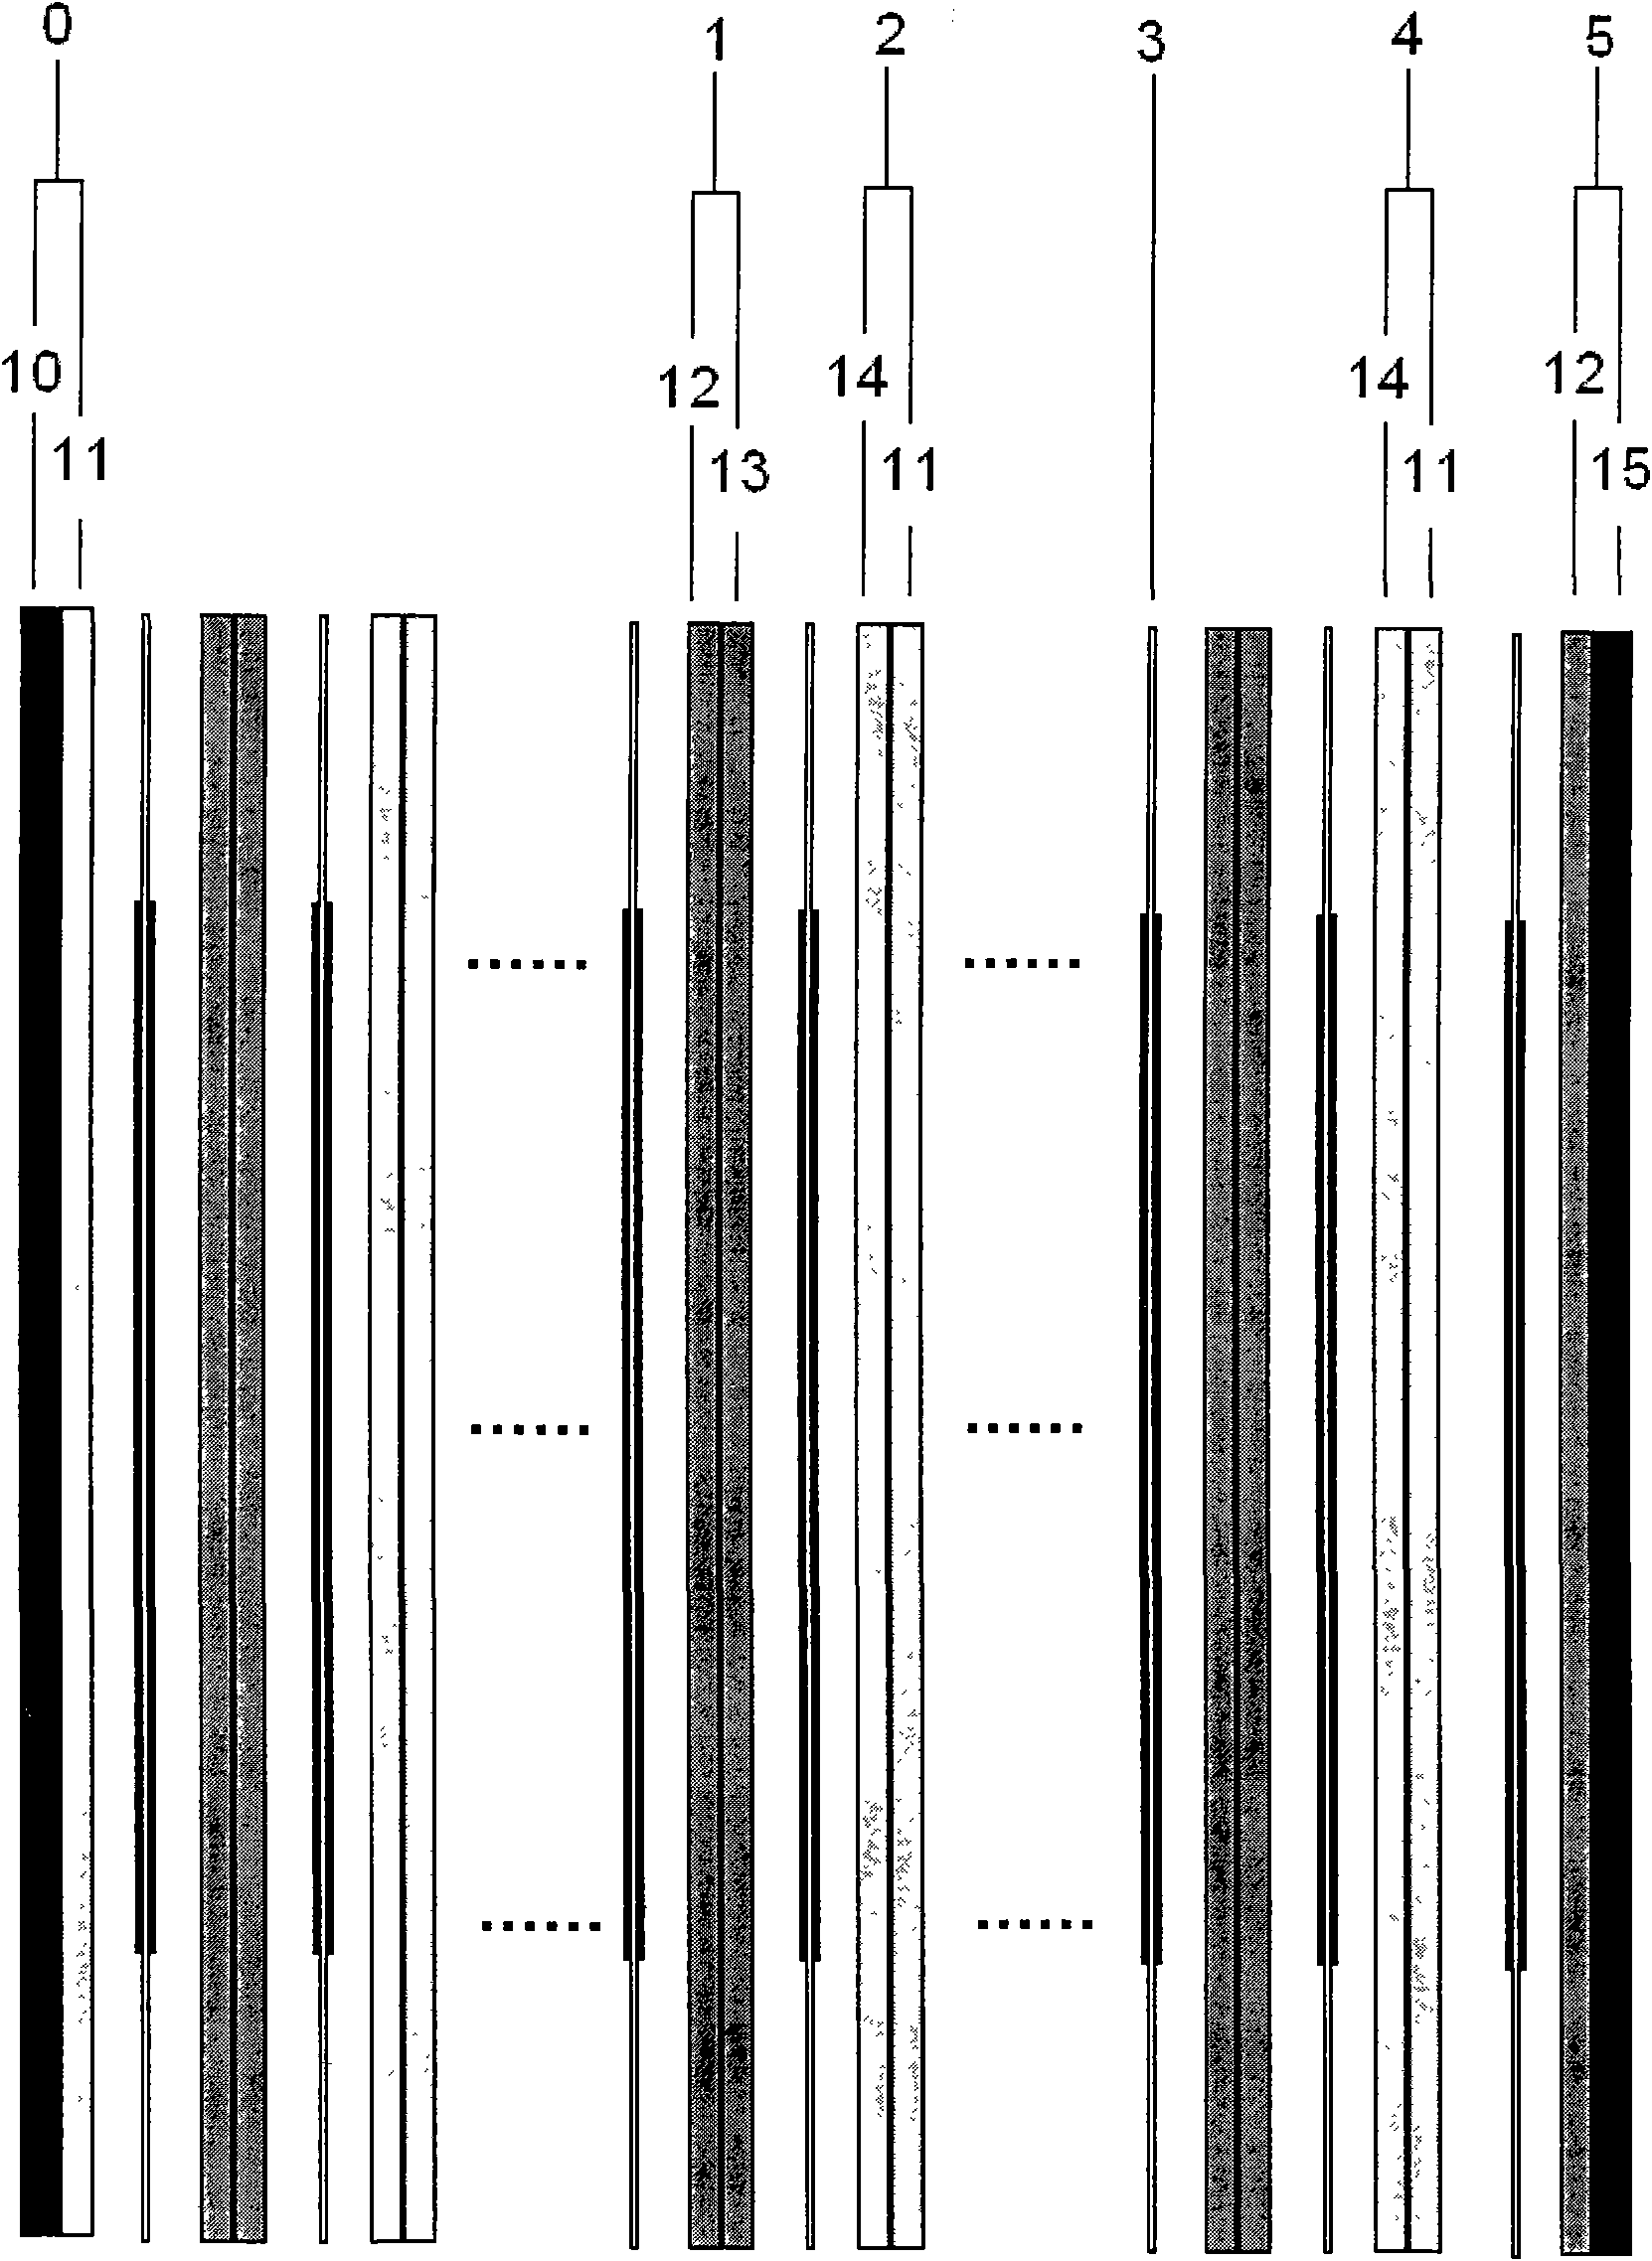 Fuel cell stack for jointly applying intraplate counter-flow flow field and interpolate counter-flow flow field